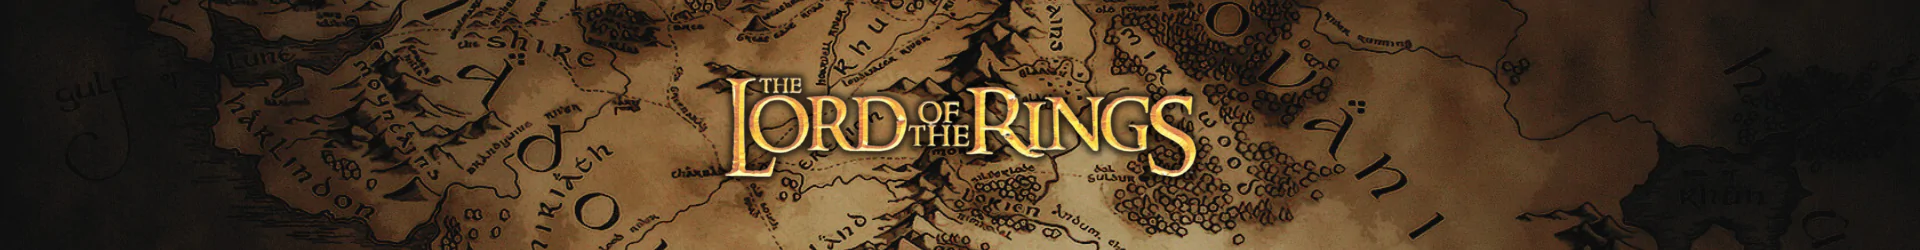 Lord of the Rings figuren banner